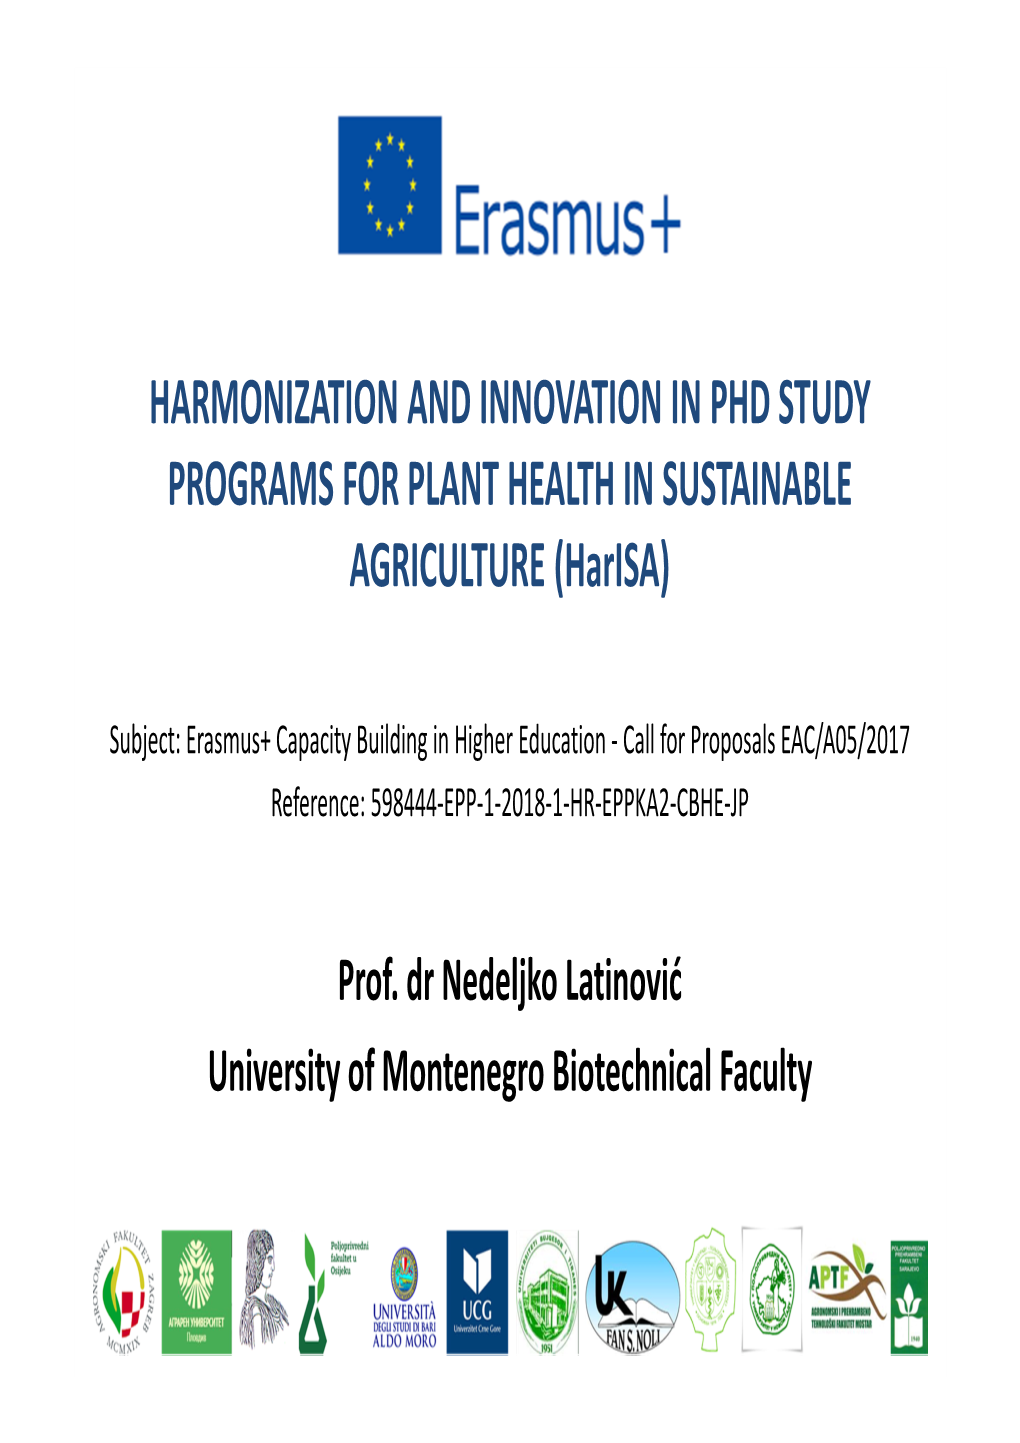 HARMONIZATION and INNOVATION in PHD STUDY PROGRAMS for PLANT HEALTH in SUSTAINABLE AGRICULTURE (Harisa)